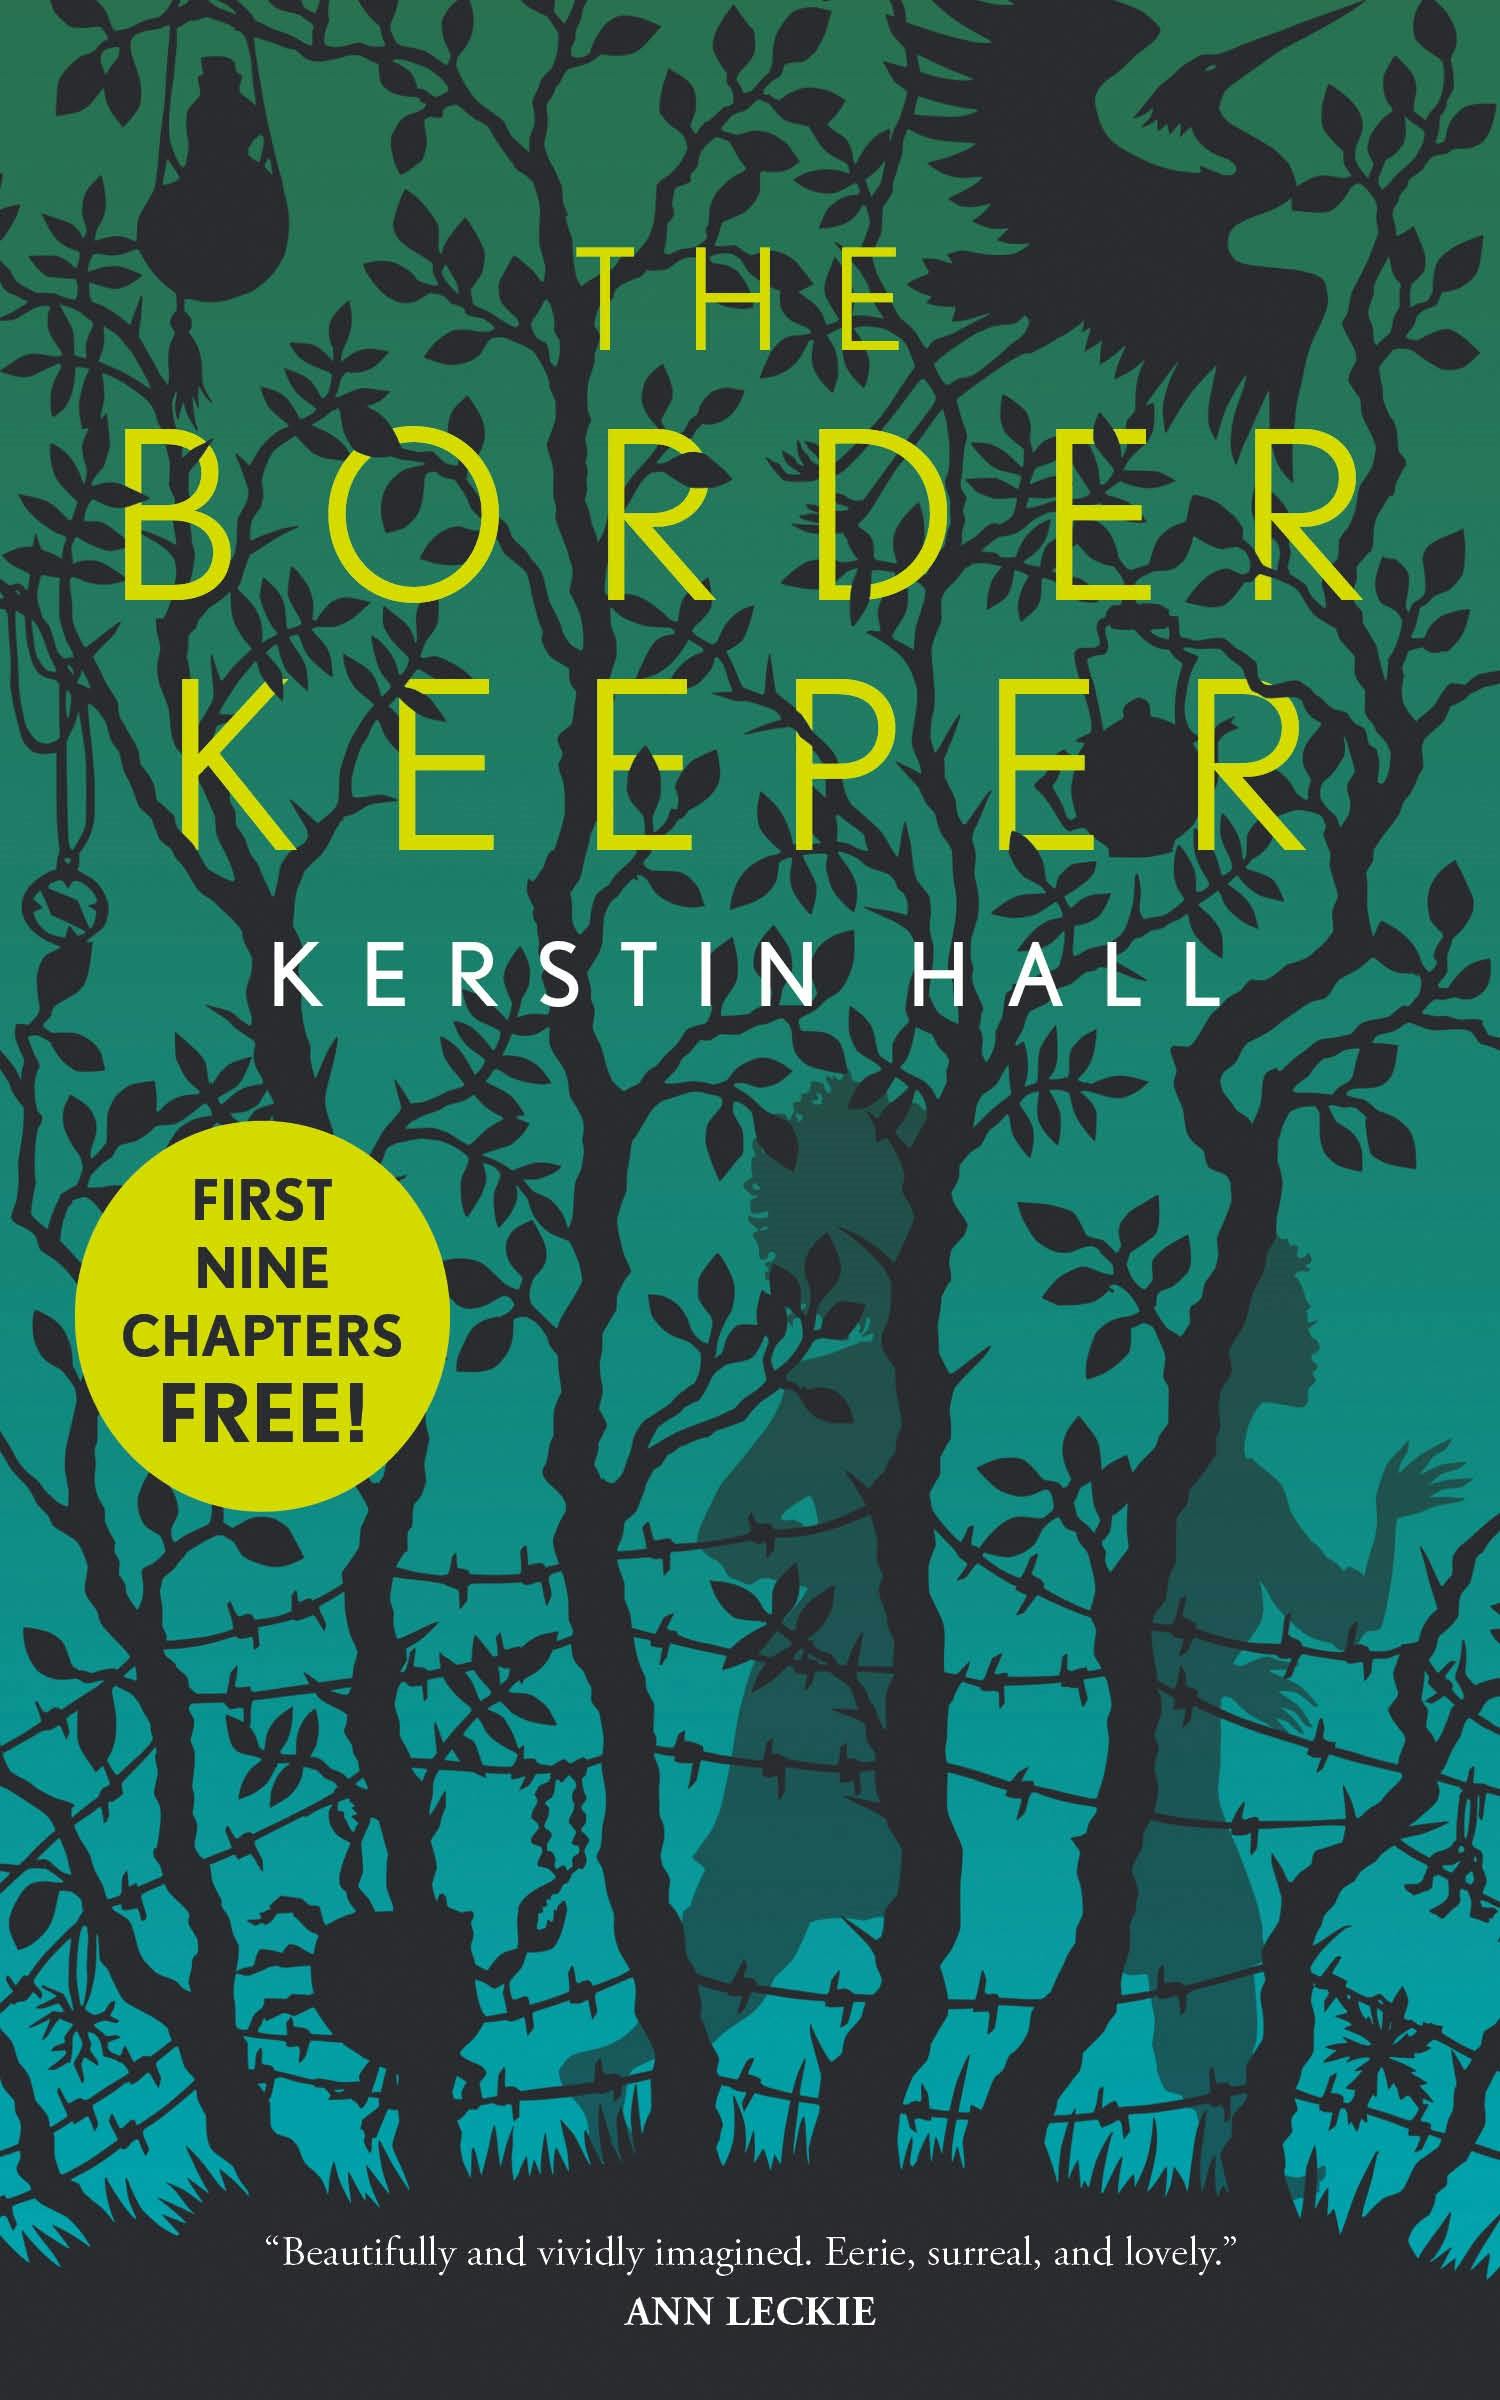 Cover for the book titled as: The Border Keeper: Chapters 1-9